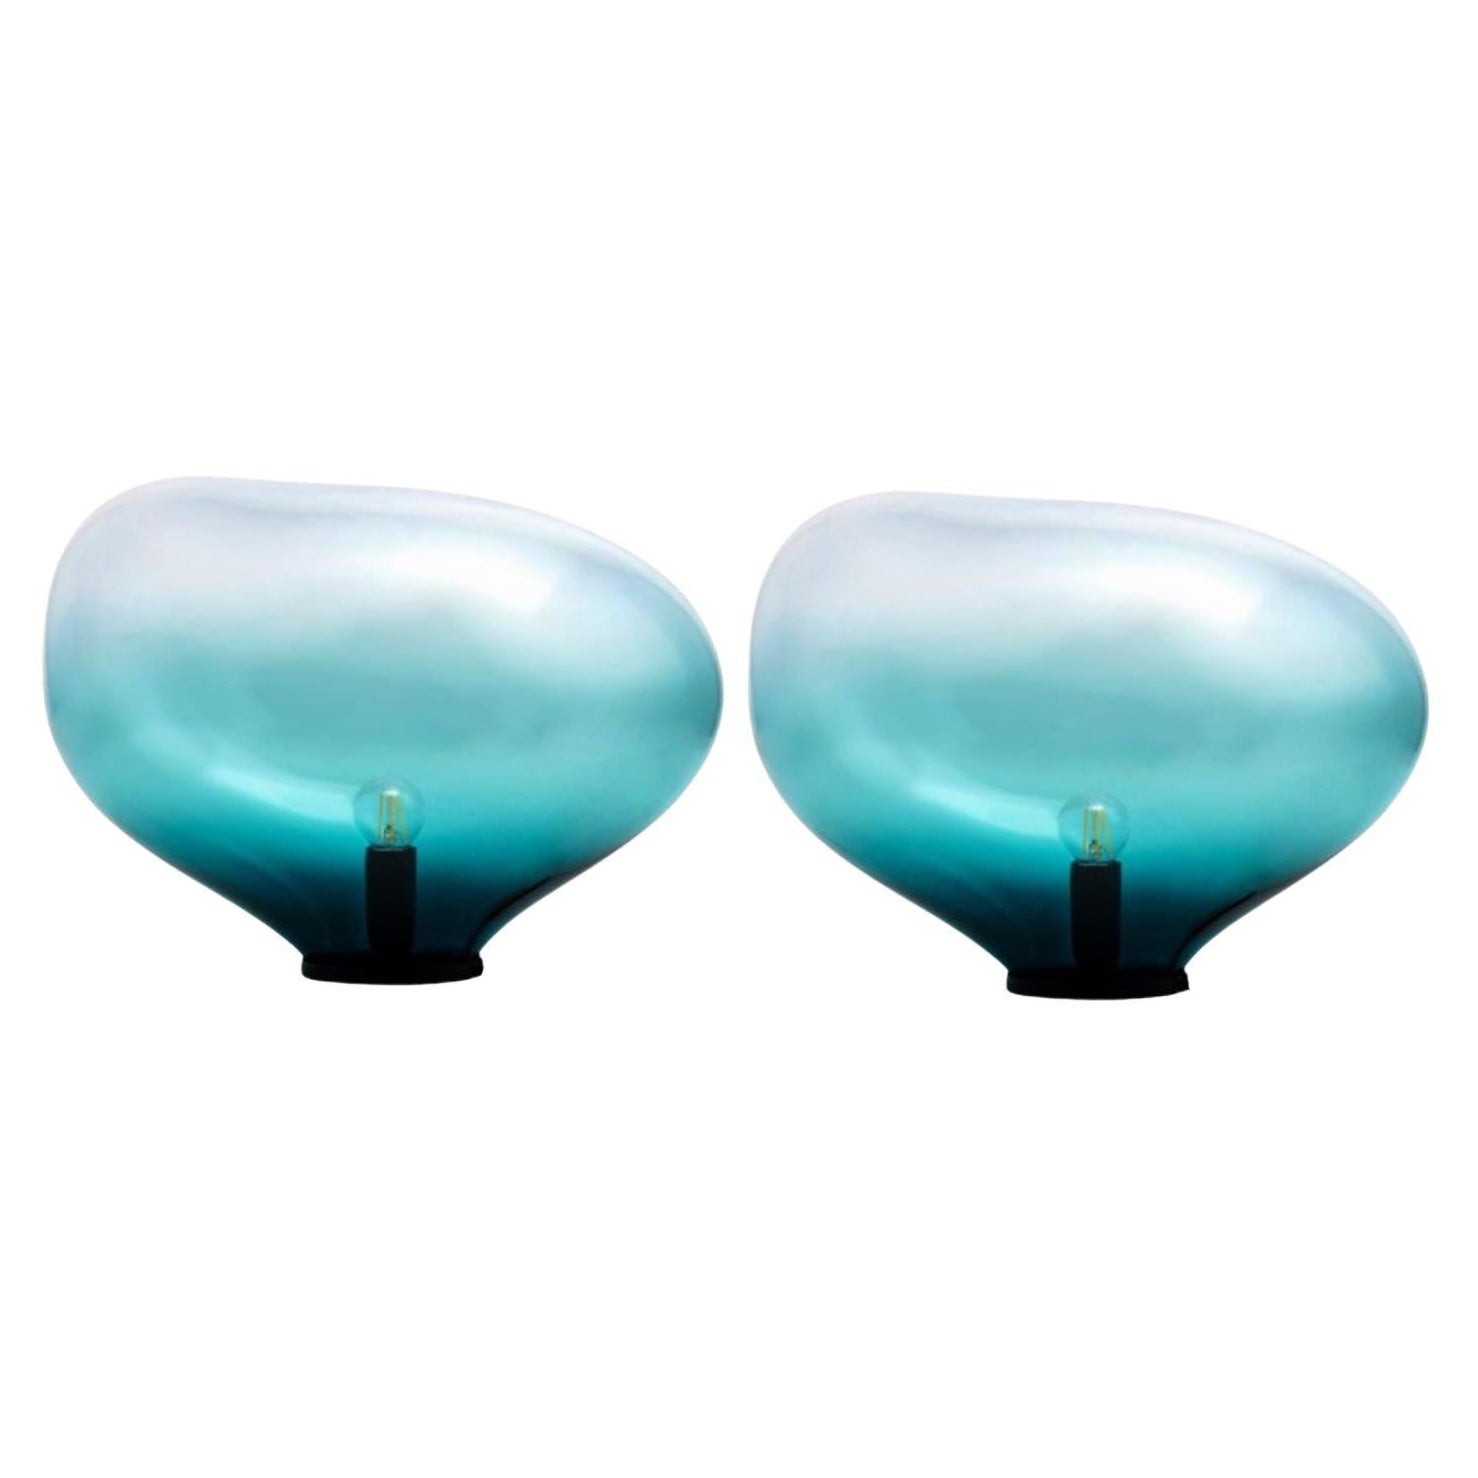 Set of 2 Sedna Petrol M Table Lamps by Eloa